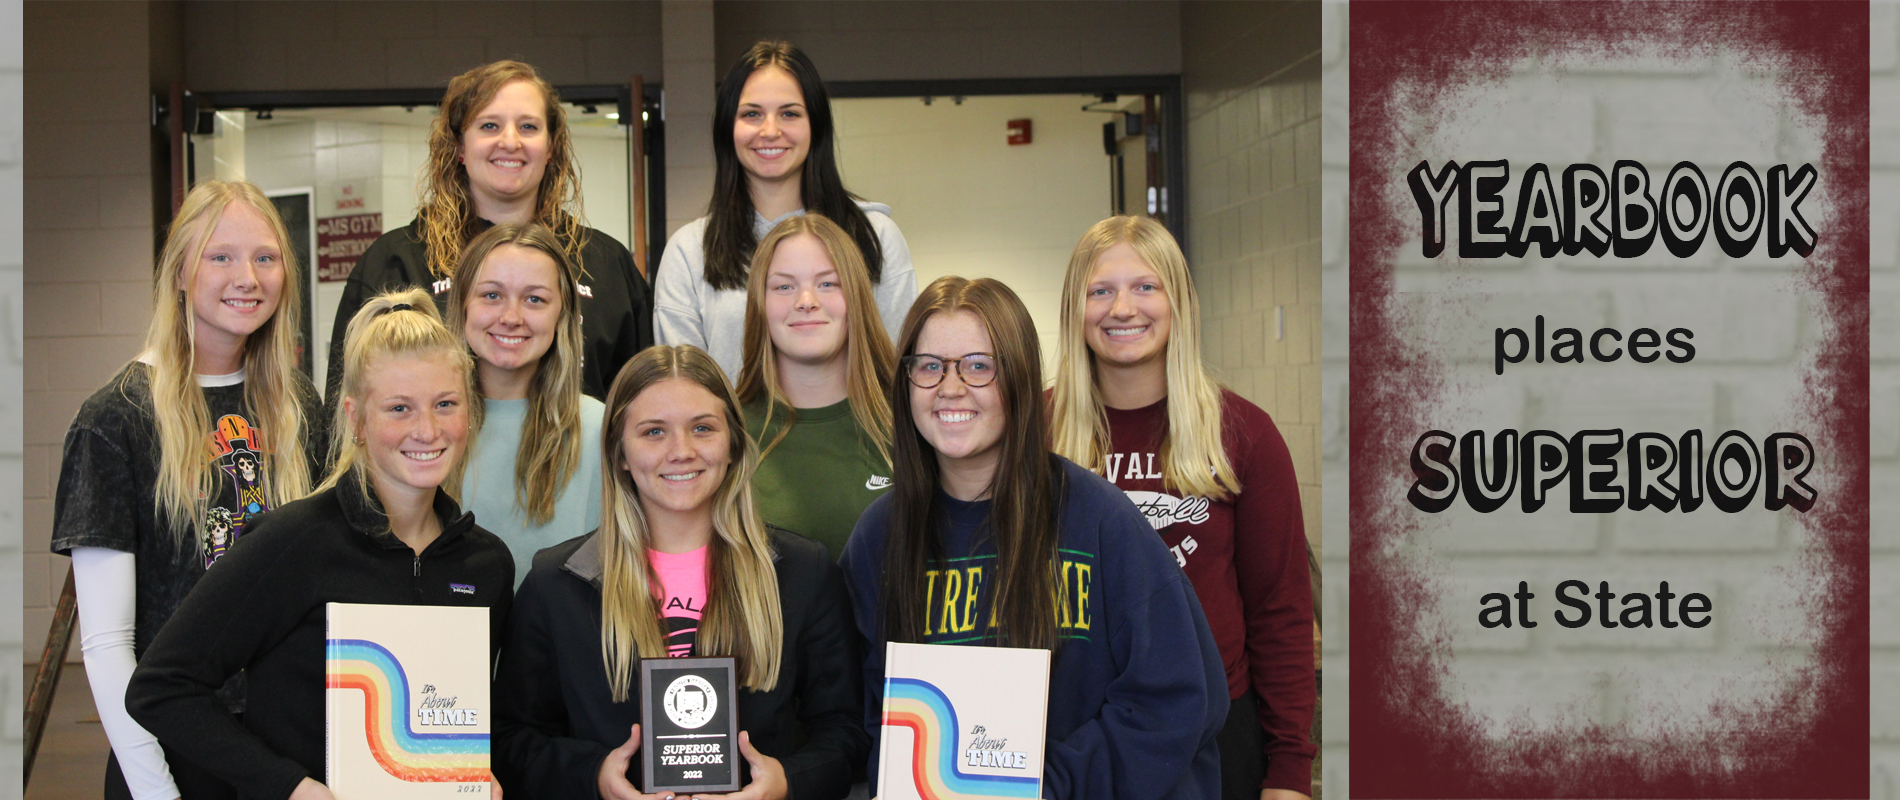 Yearbook places at state.